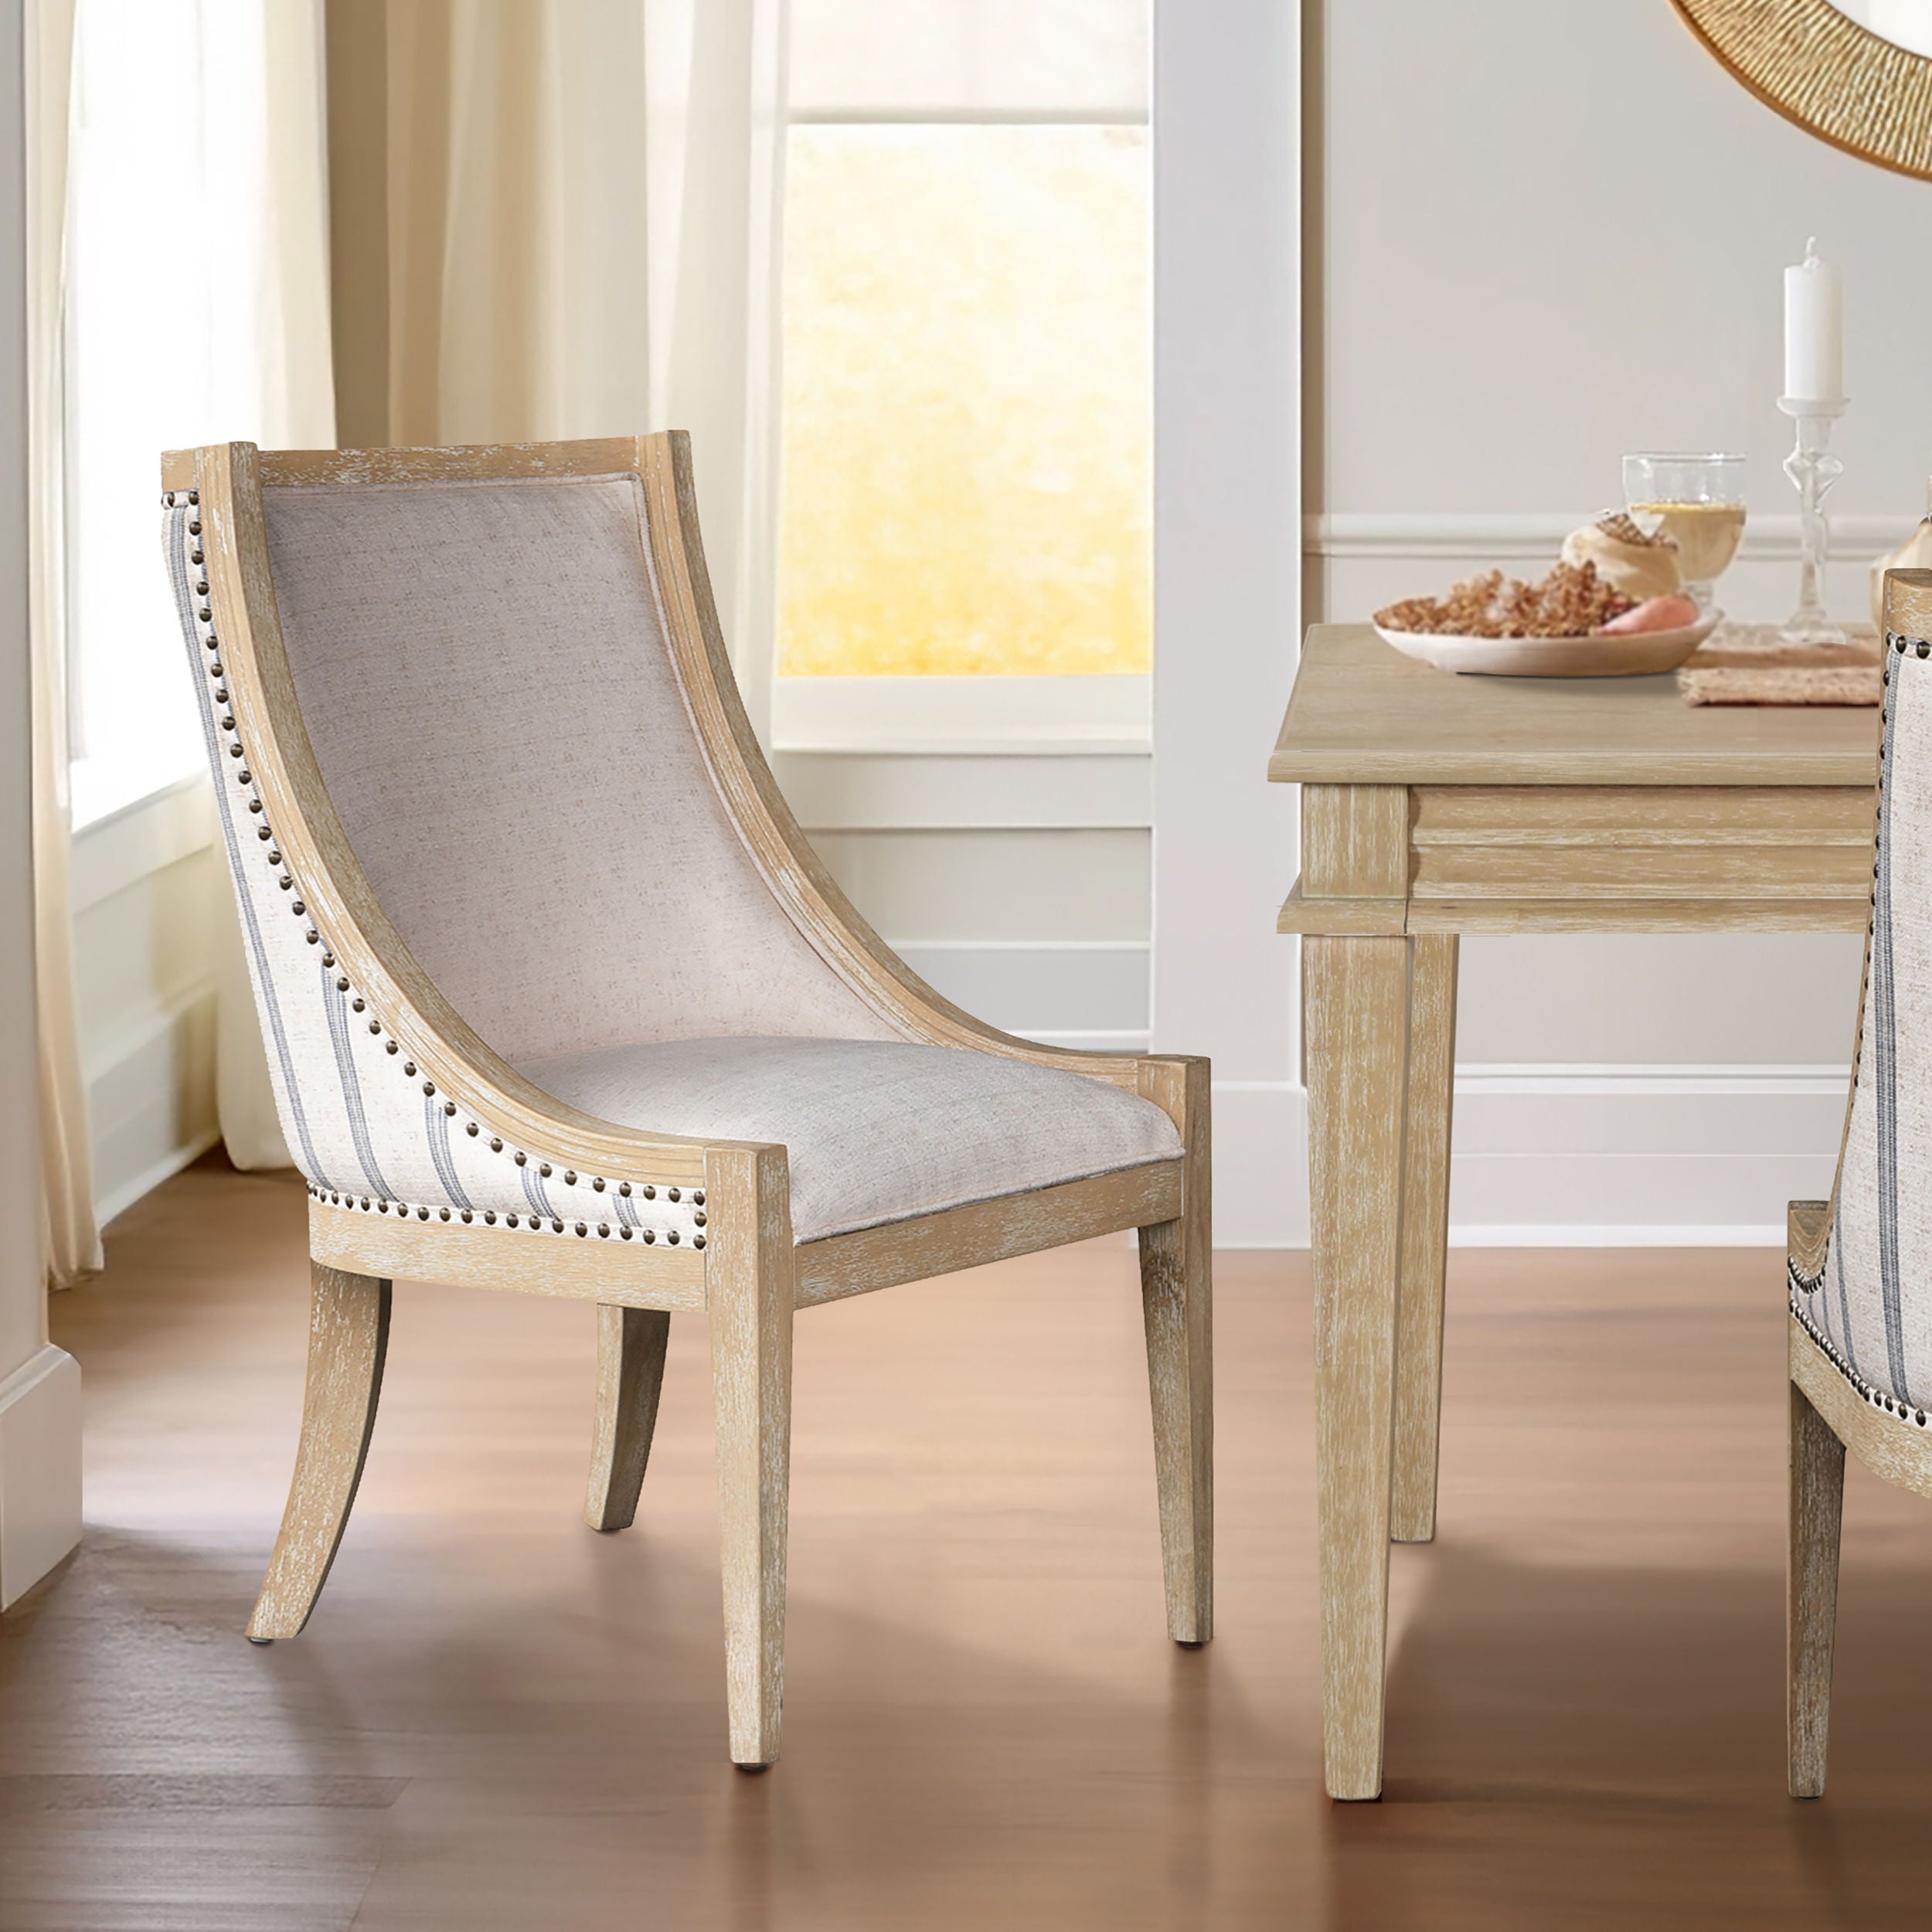 Elmcrest - Upholstered Dining Chair With Nailhead Trim - Beige Stripe